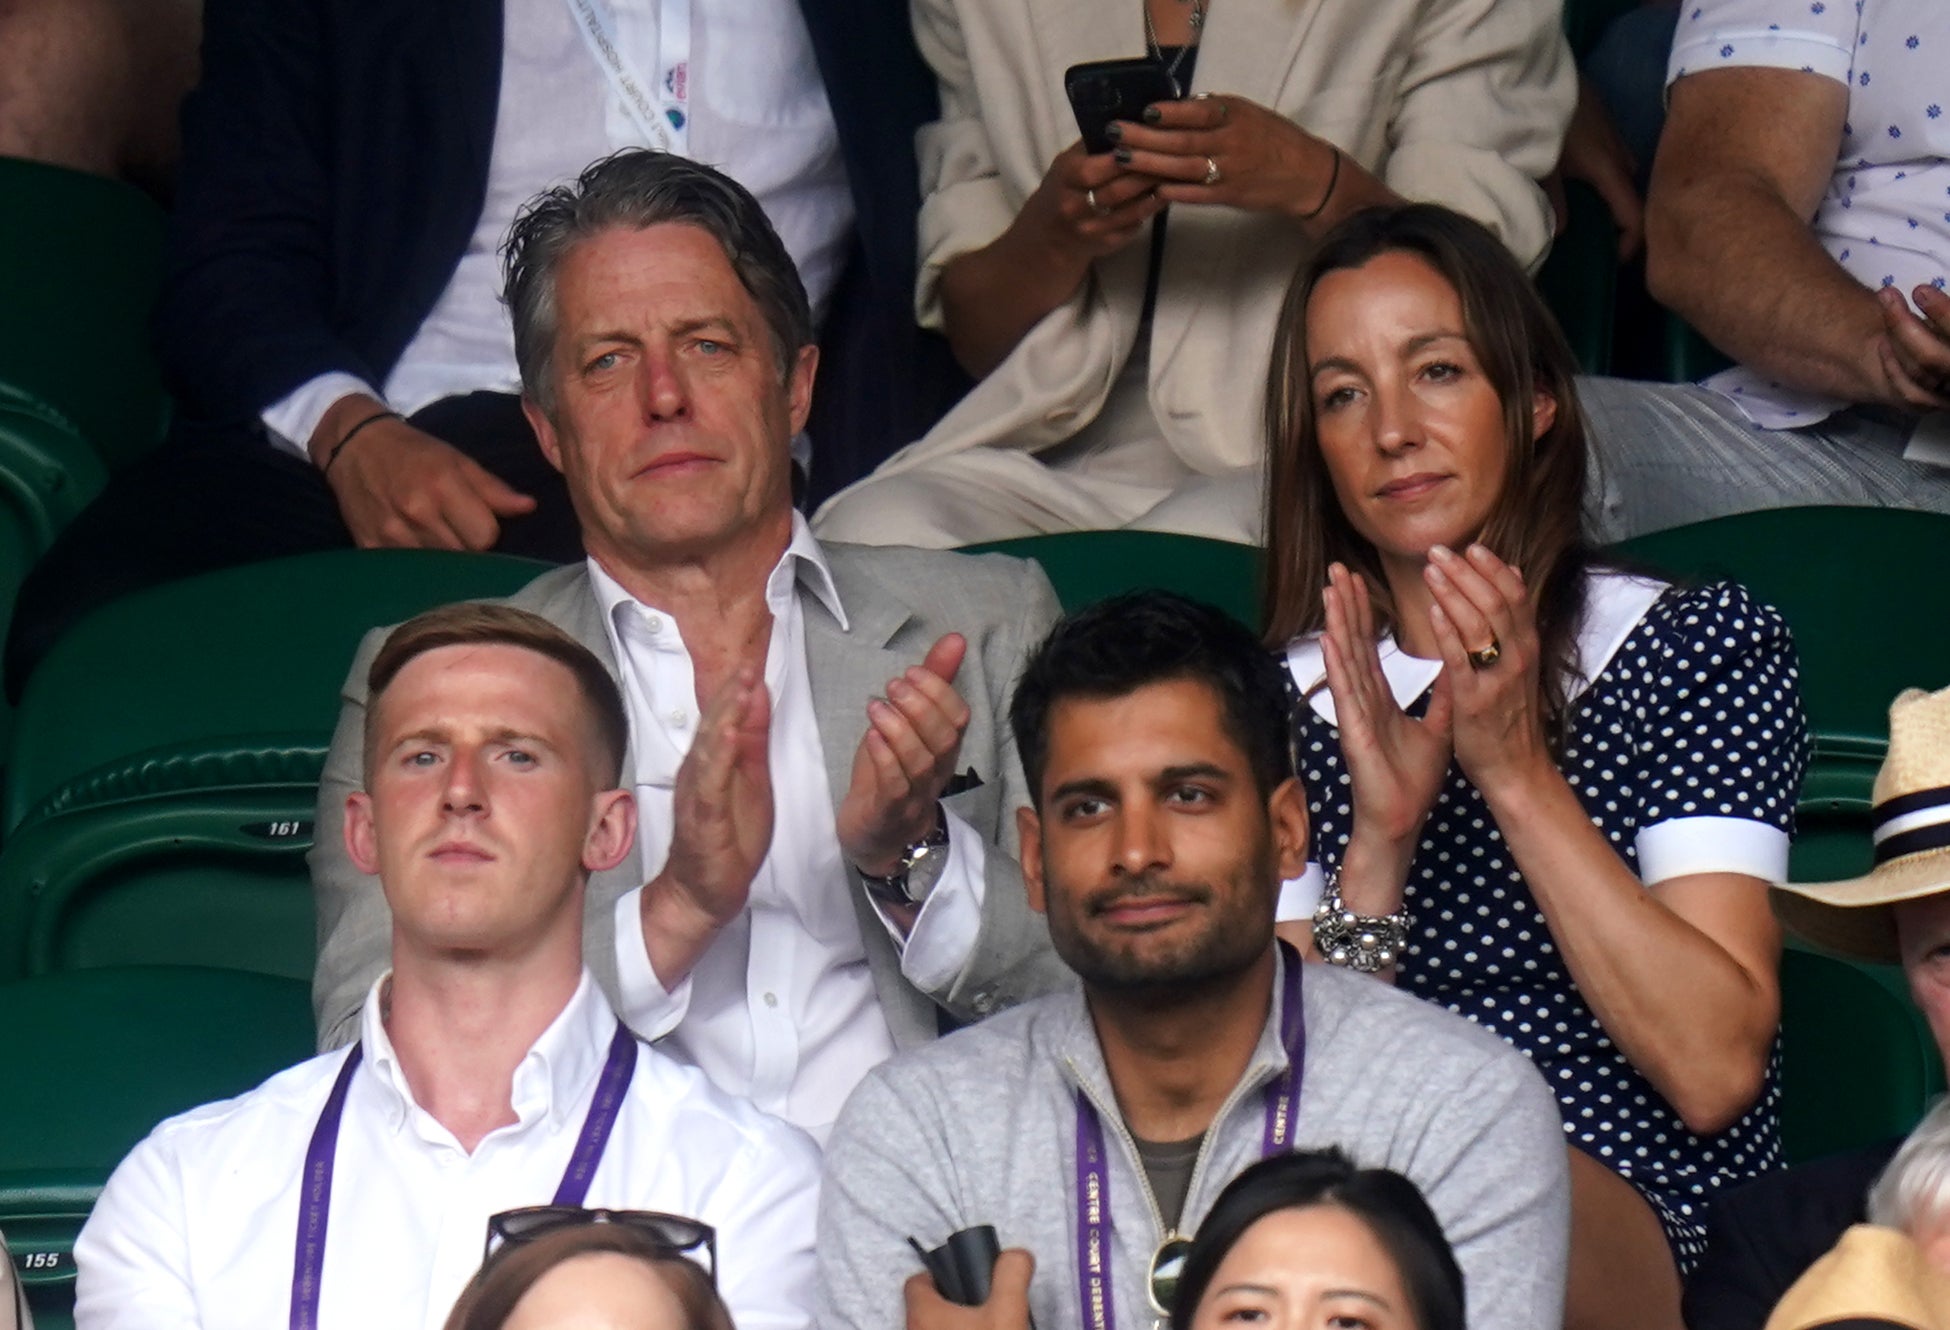 Hugh Grant and Anna Elisabet Eberstein clapped along as they watch the action from the sidelines (Adam Davy/PA)